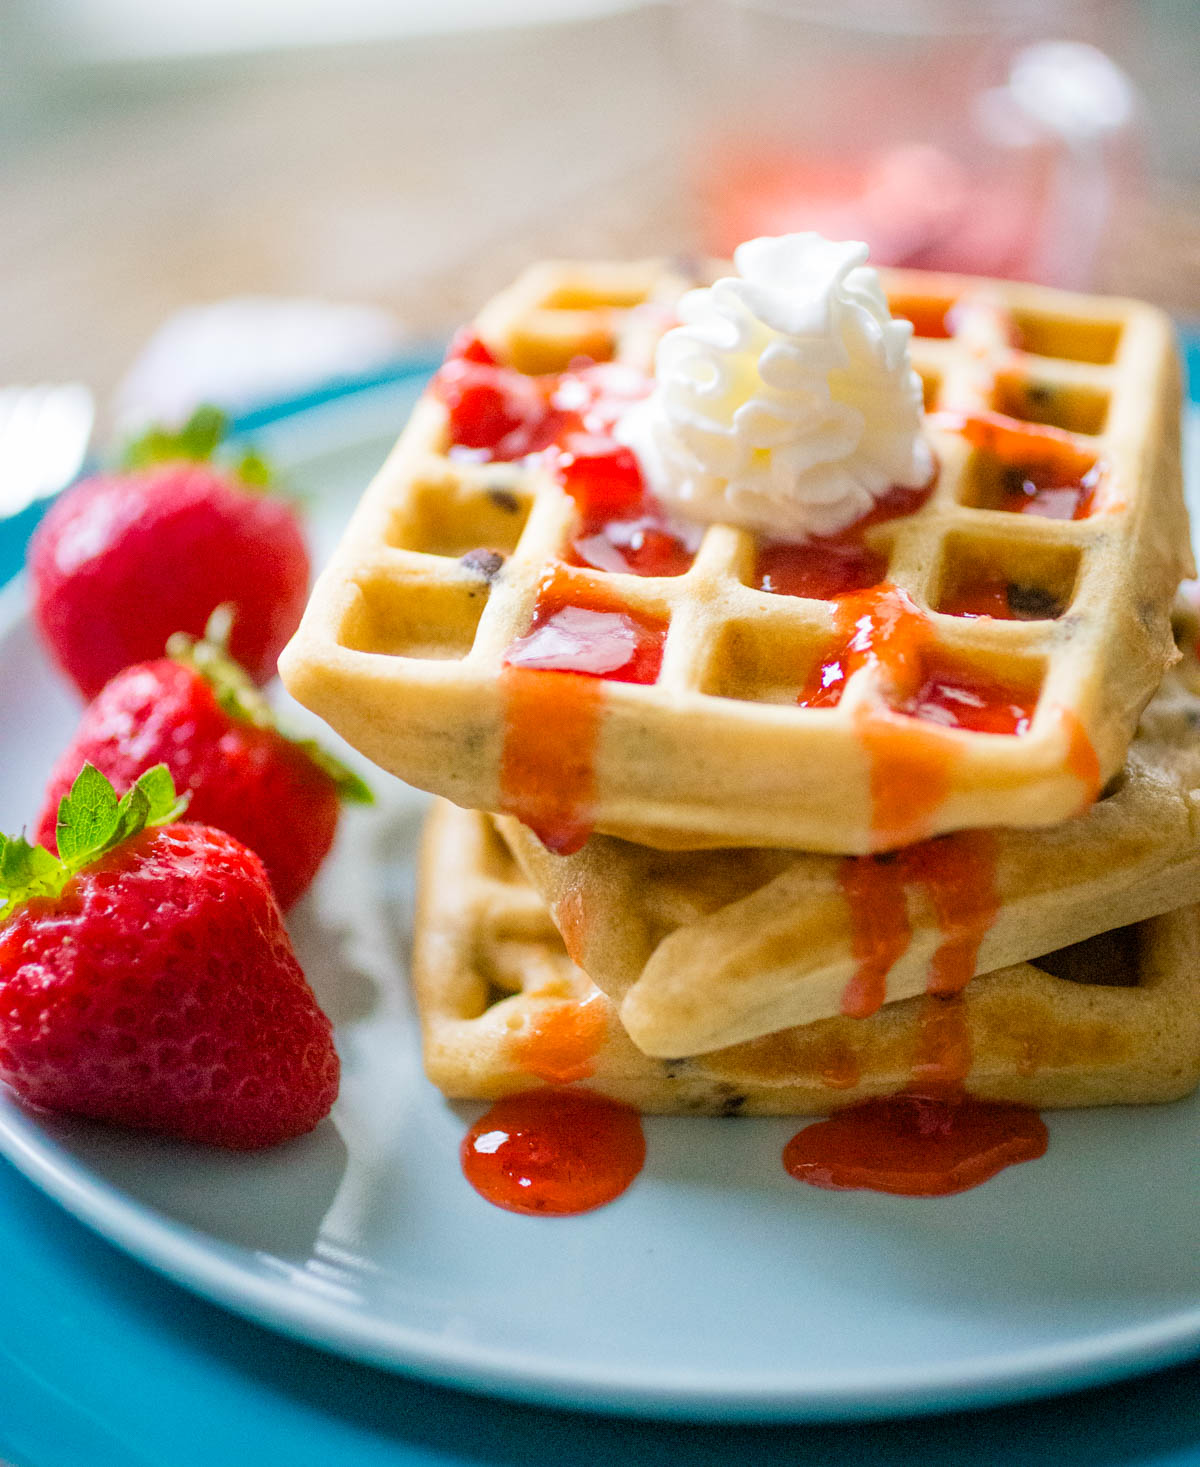 The stack of peanut butter waffles has strawberry jelly running down the sides and a dollop of whipped cream on top.